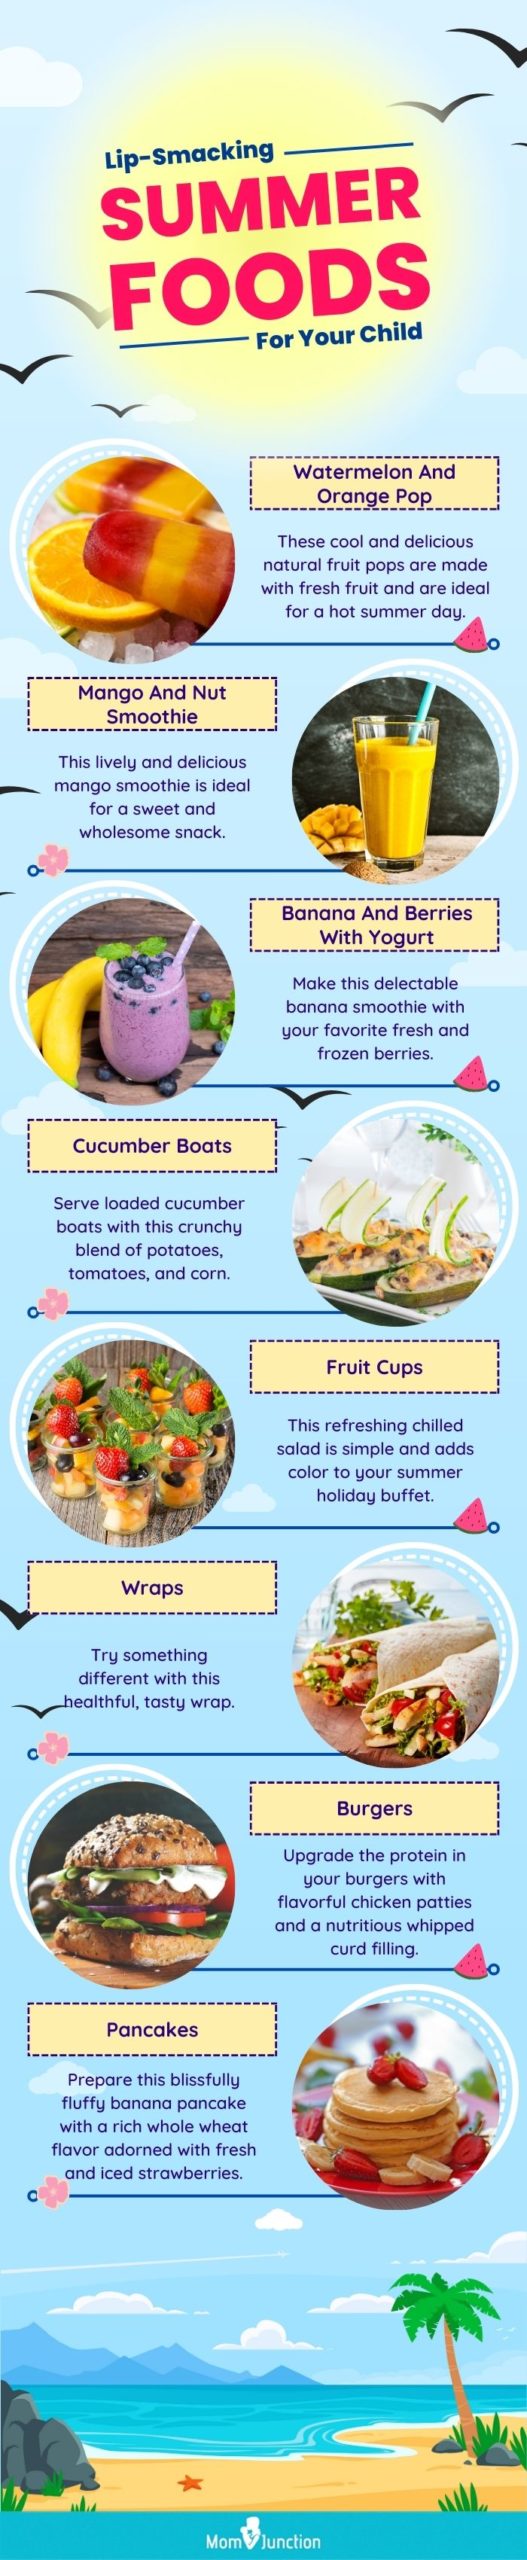 lip smacking summer foods for your child (infographic)